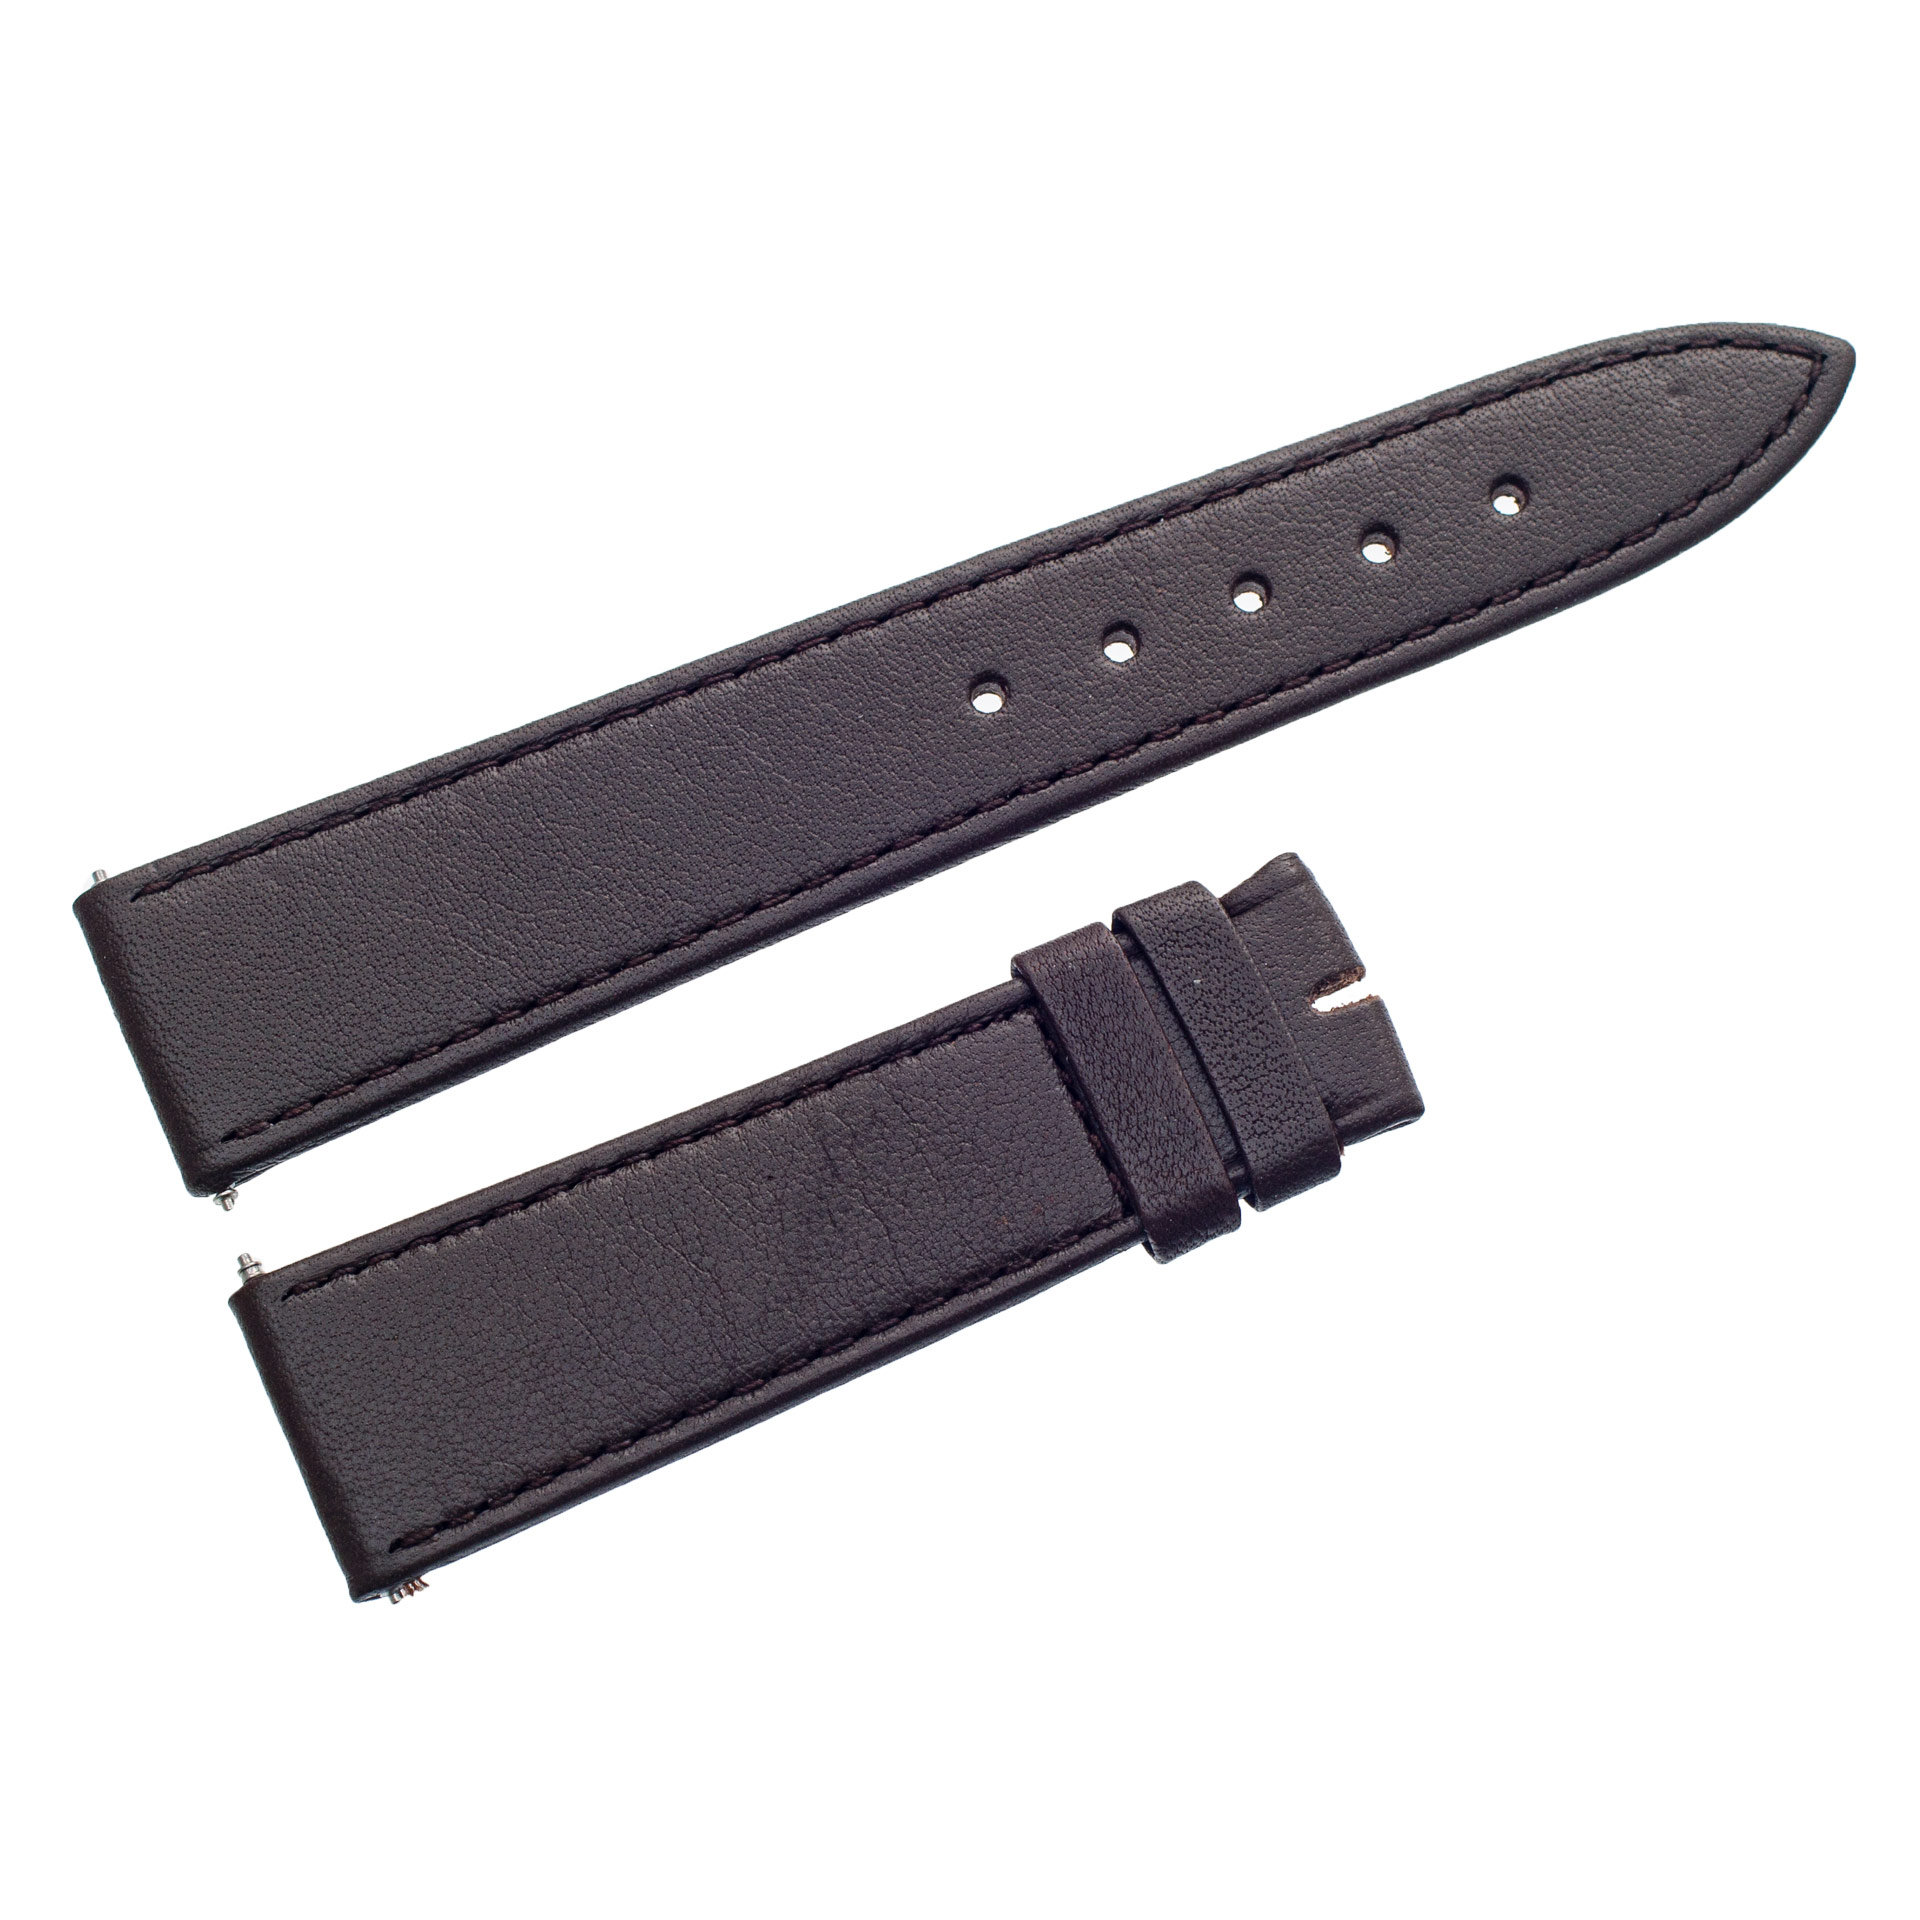 Rolex brown leather strap 18mm x 16mm